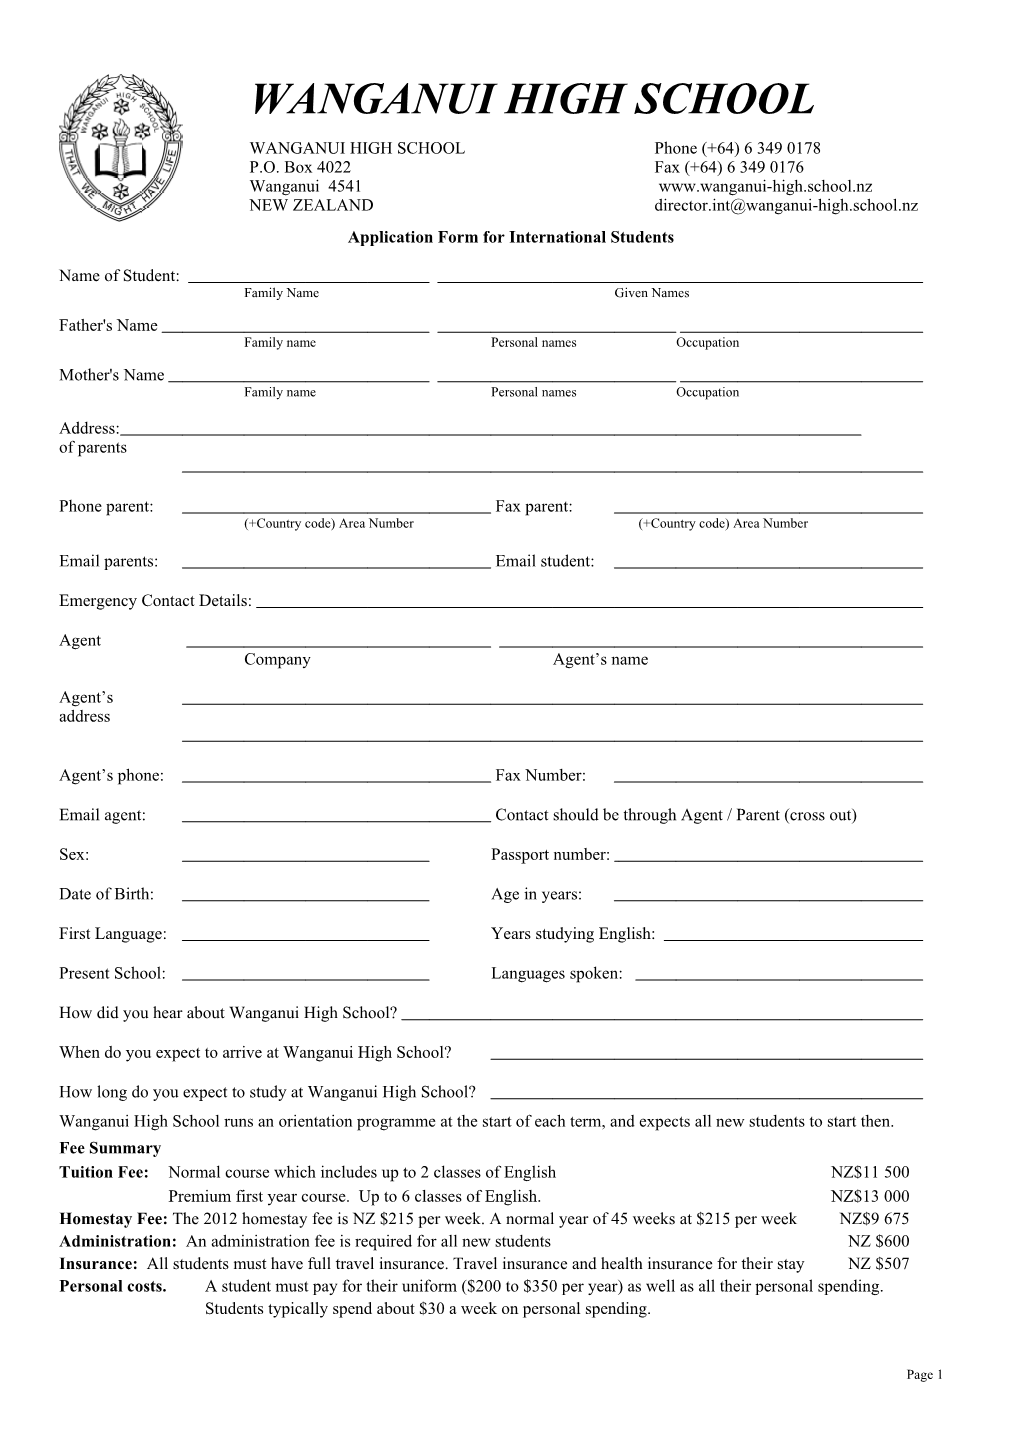 Application Form for International Students